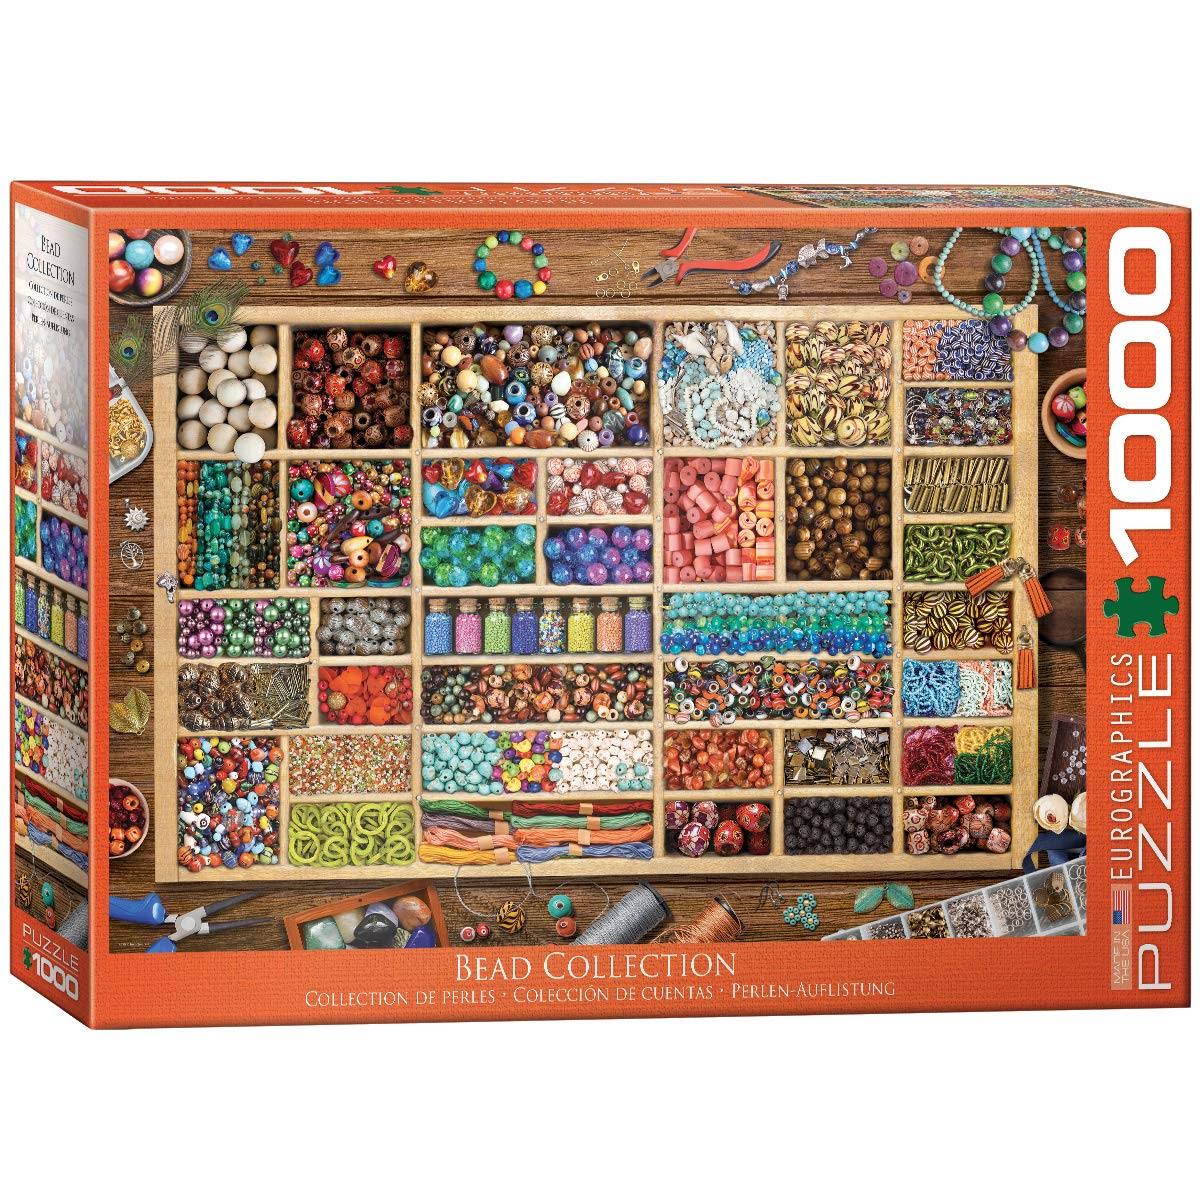 Eurographics - Bead Collection - 1000 Piece Jigsaw Puzzle